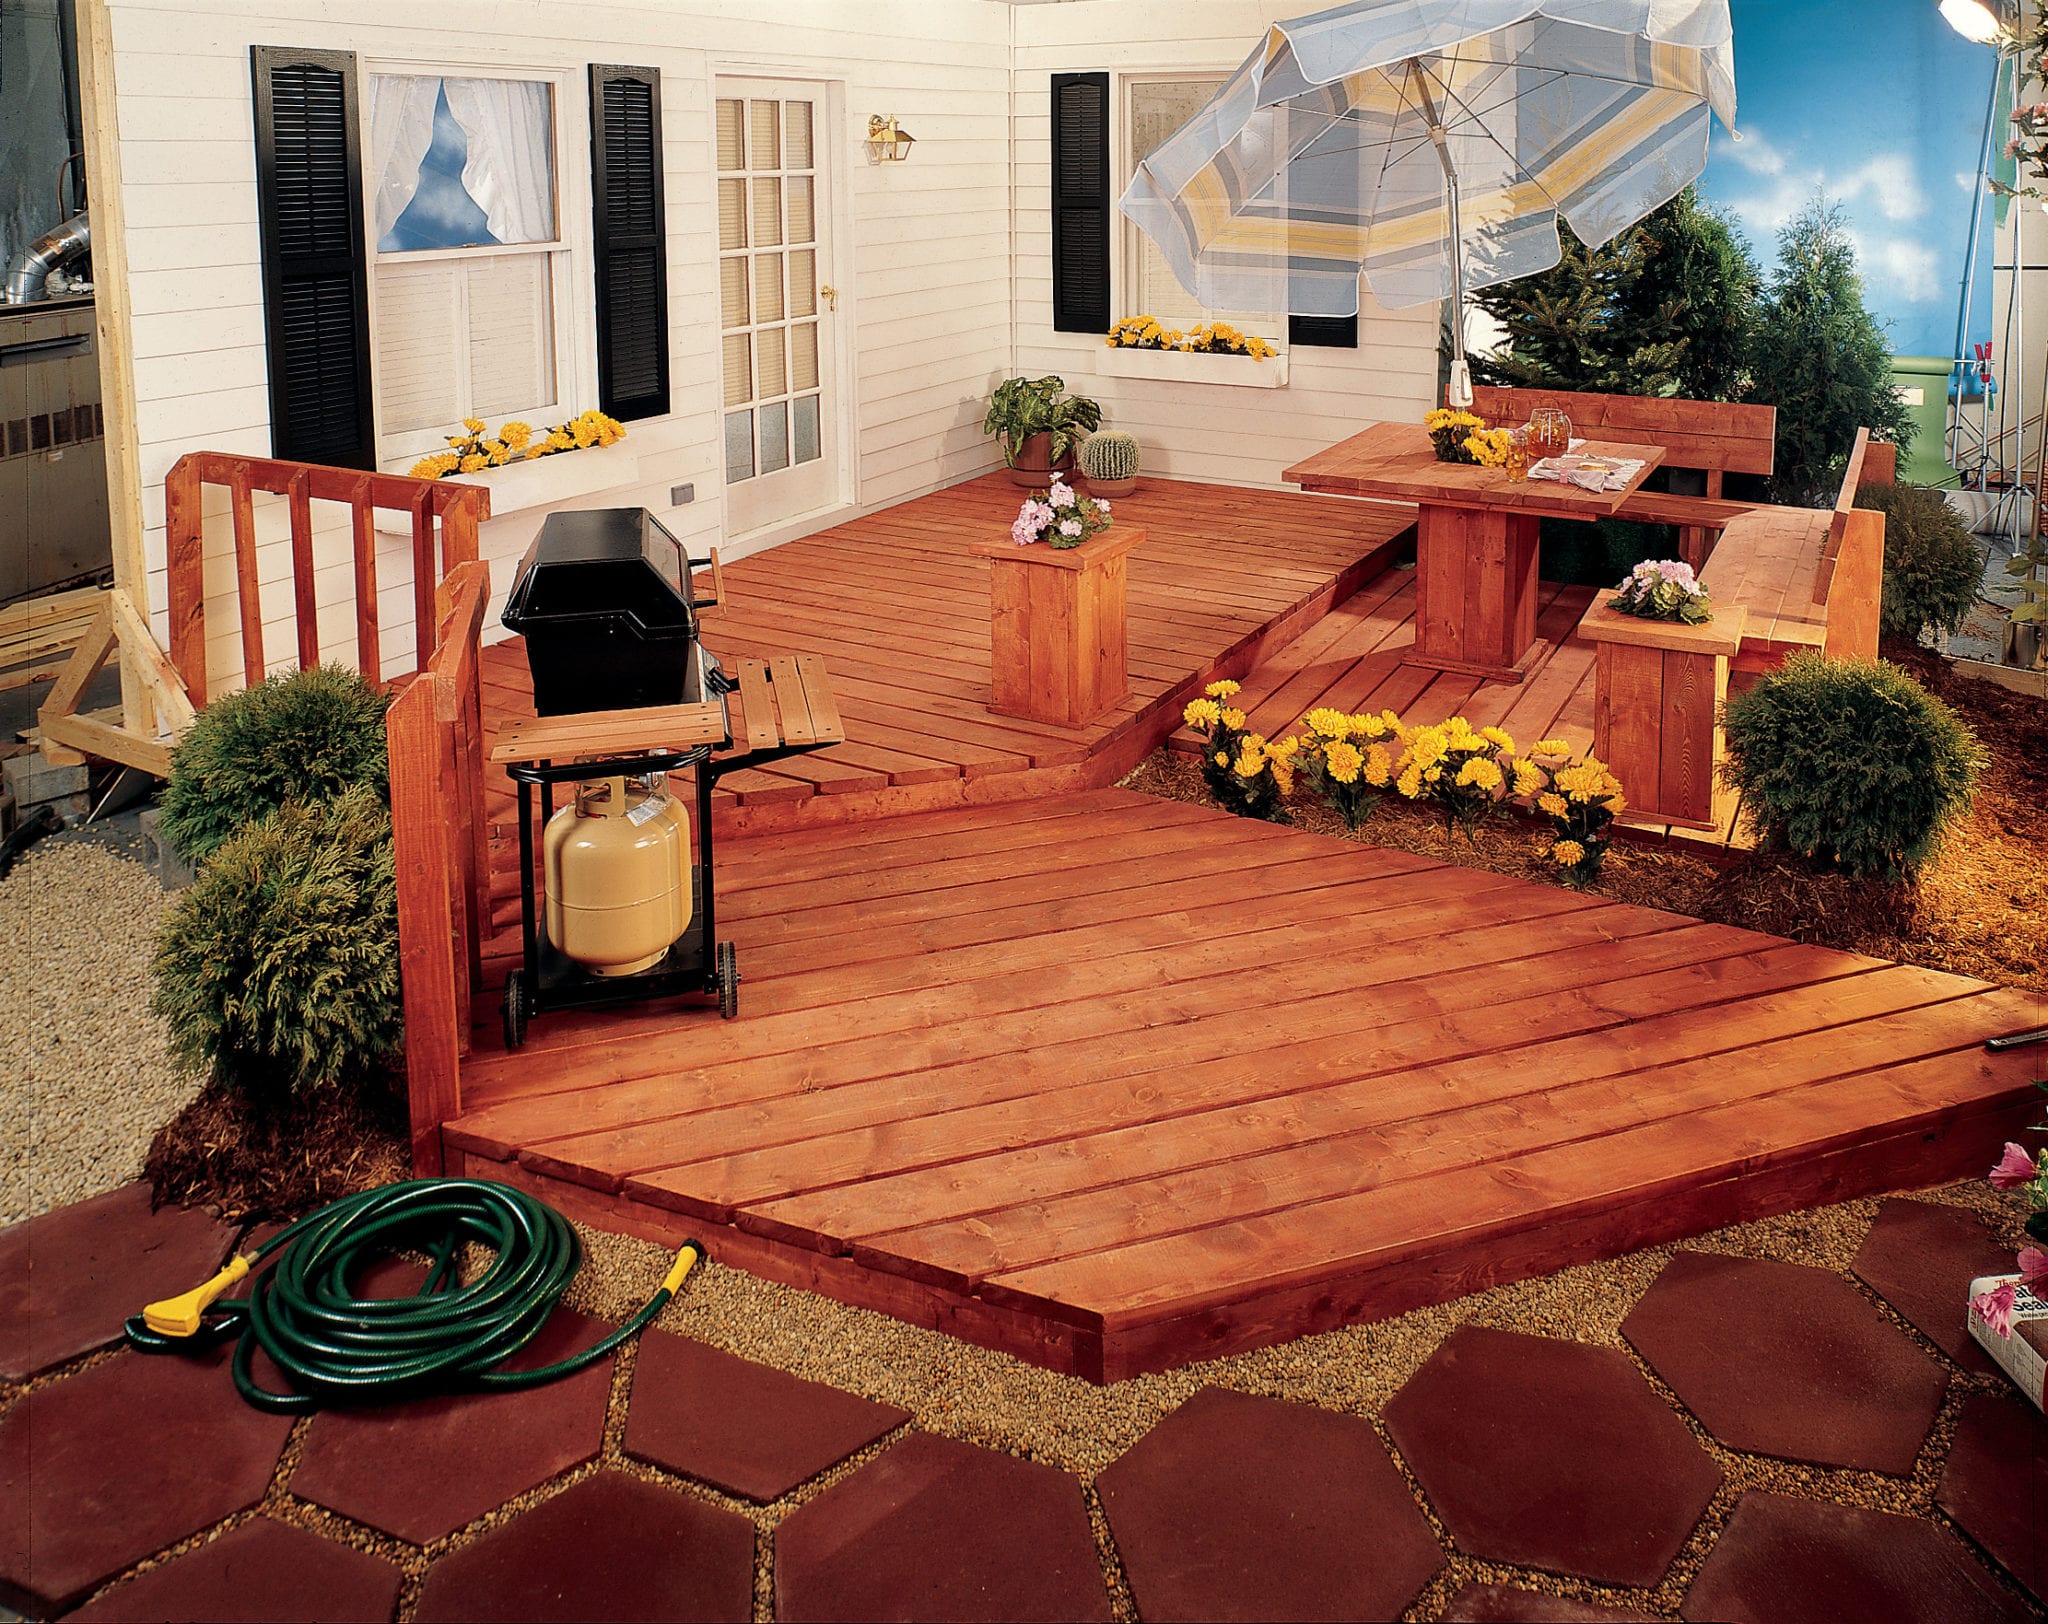 Sherwin-Williams to launch comprehensive deck system